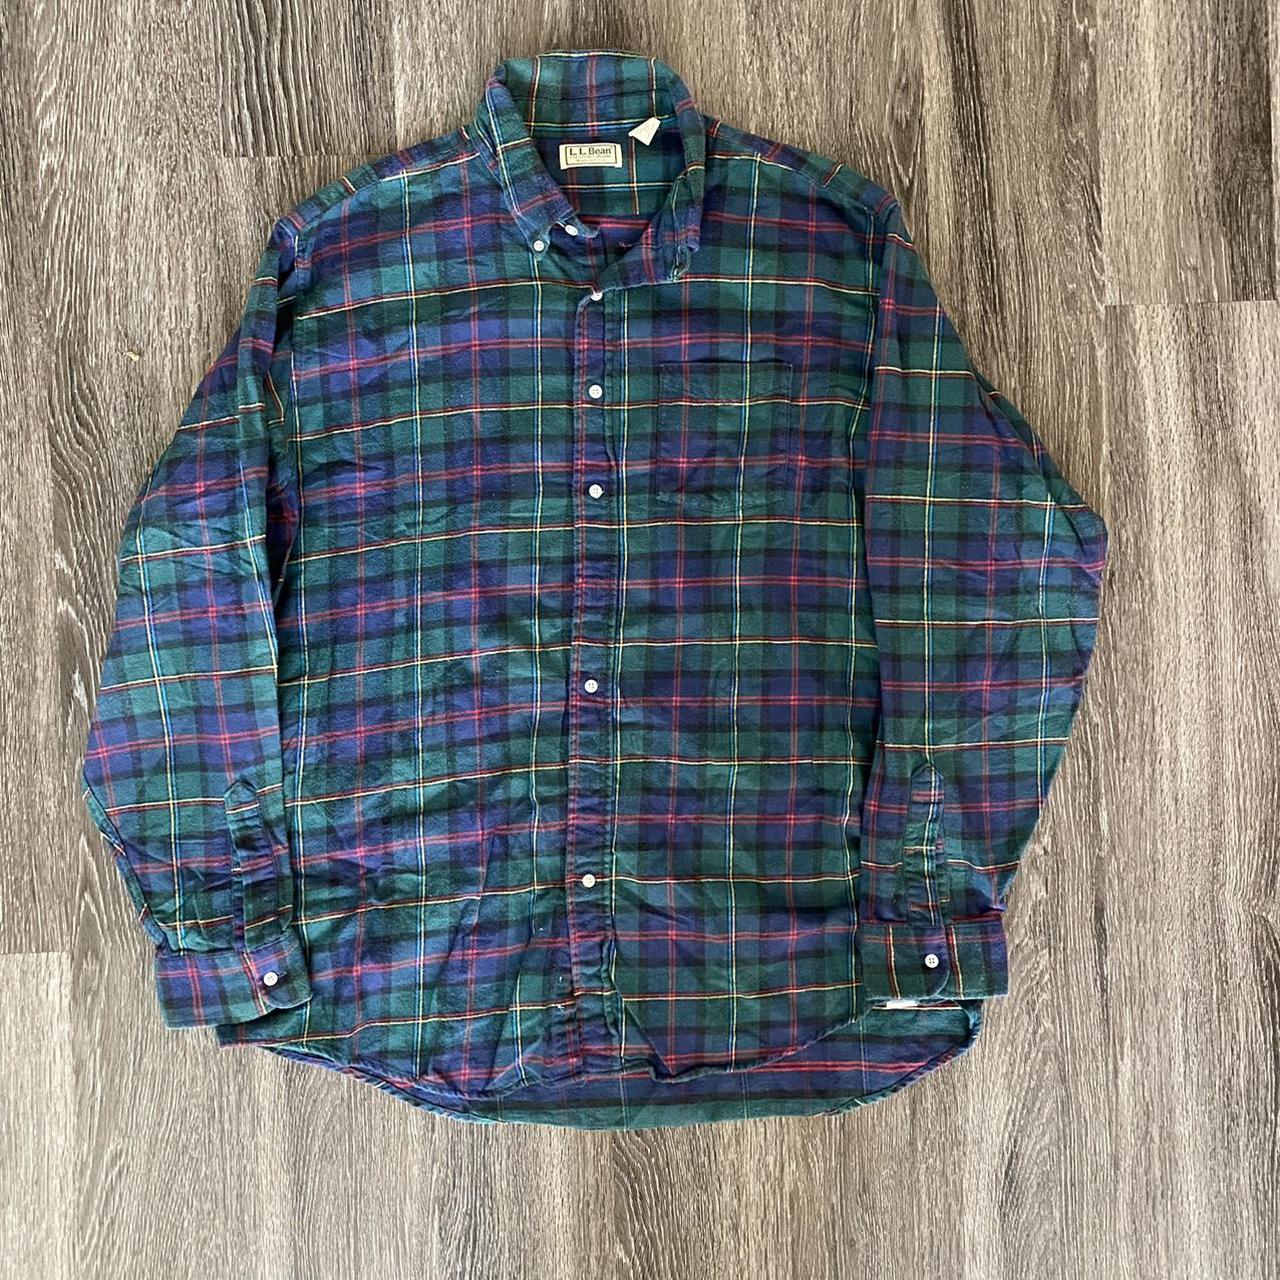 Product Image 1 - Vintage Ll bean made in